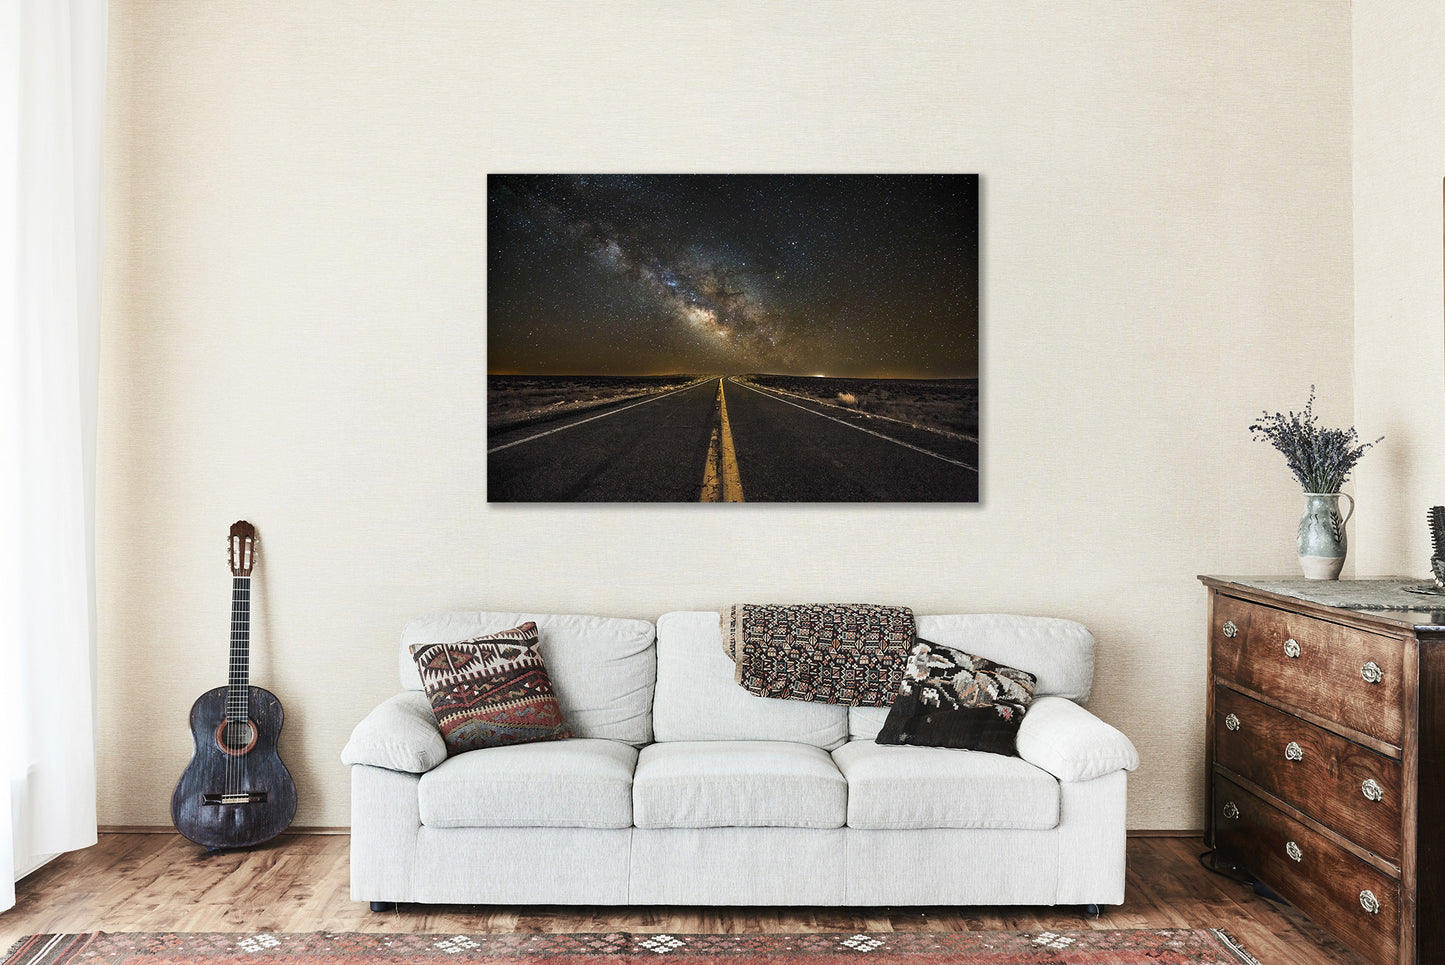 Night Sky Canvas Wall Art (Ready to Hang) Gallery Wrap of Highway Leading to Milky Way Rising Above Horizon in Arizona Desert Photography Celestial Decor